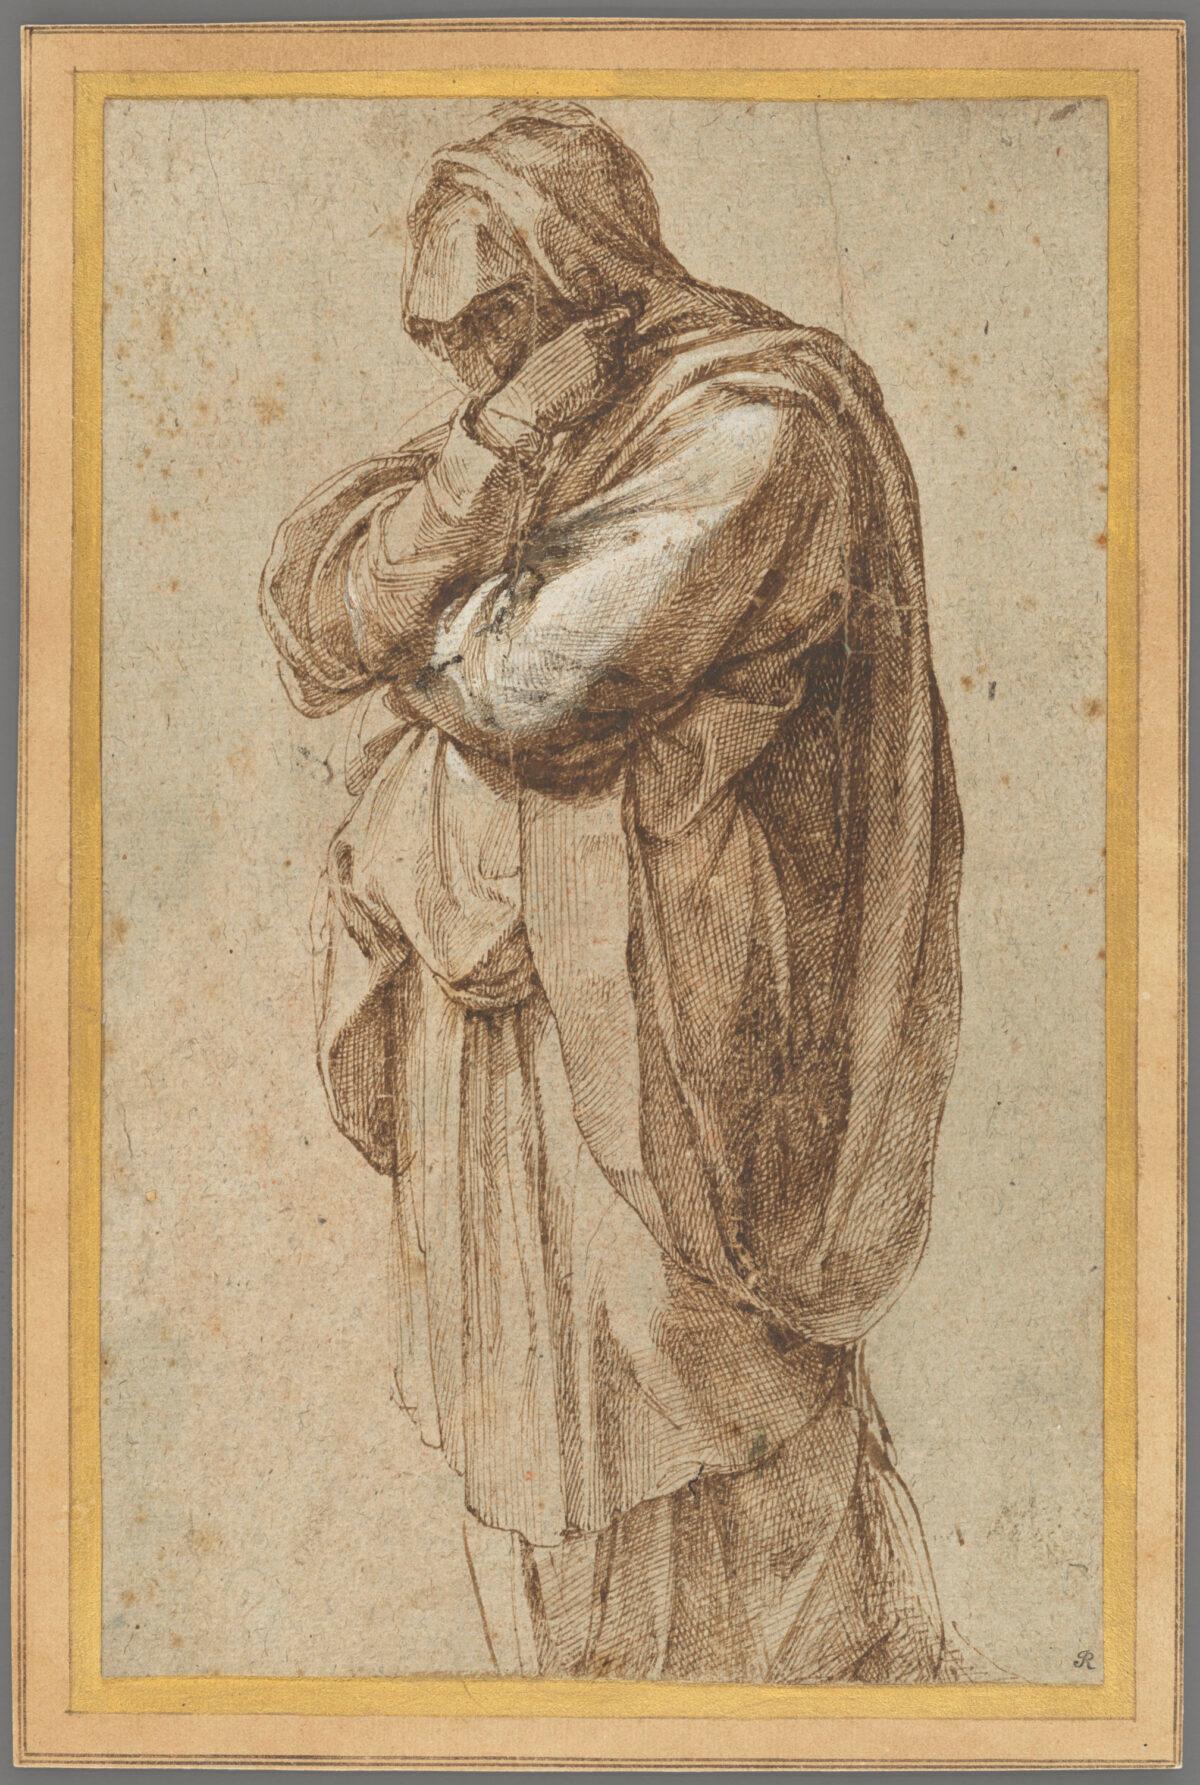 Study of a Mourning Woman, 1500–1505, by Michelangelo. Pen and brown ink, heightened with white lead opaque watercolor. (Public Domain)